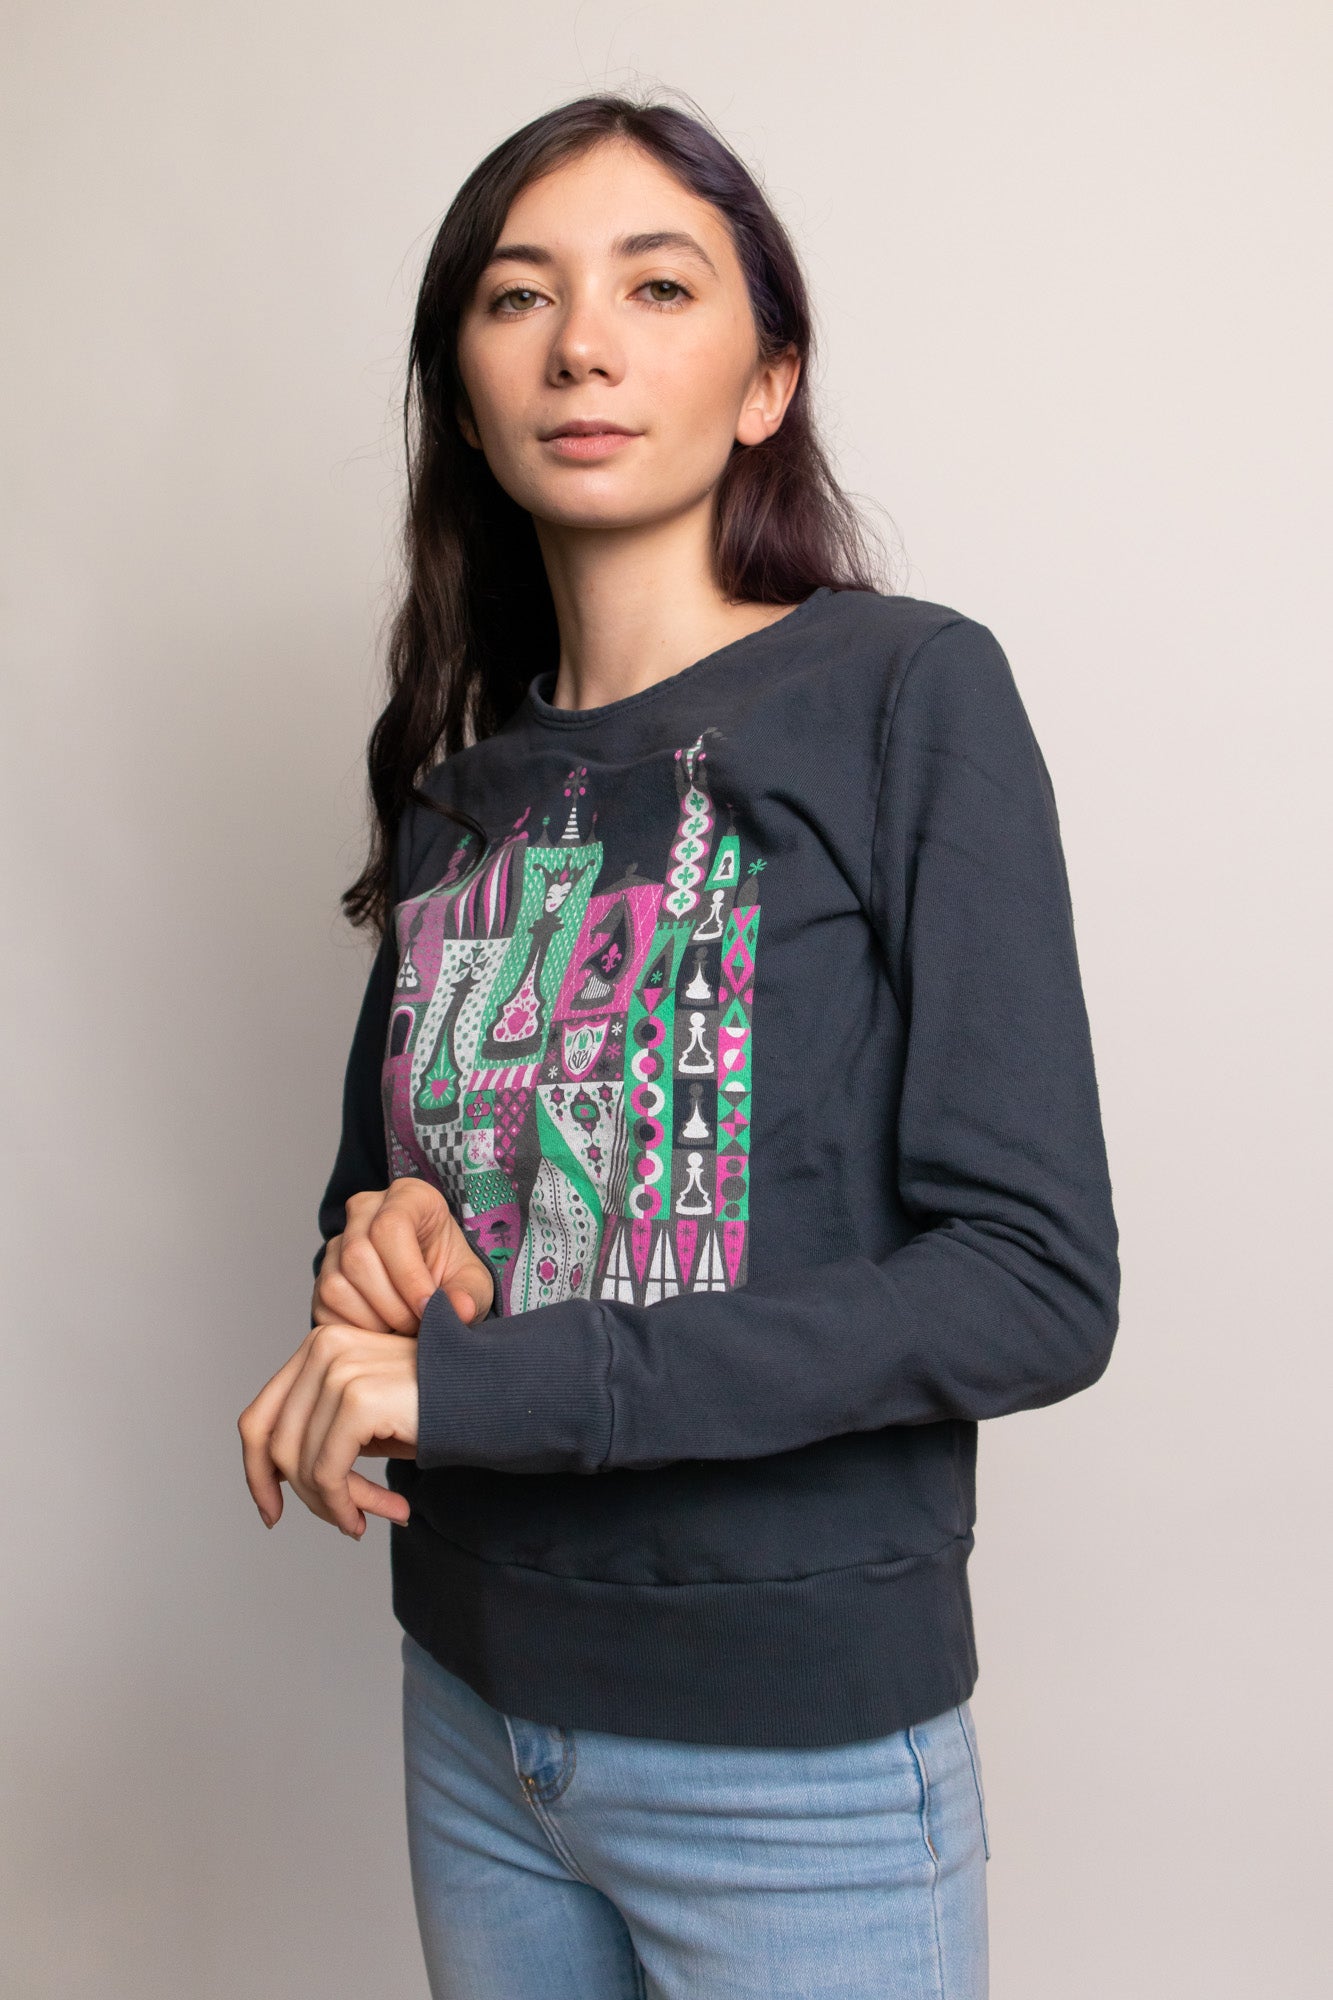 Grey chess print pullover sweatshirt on young woman